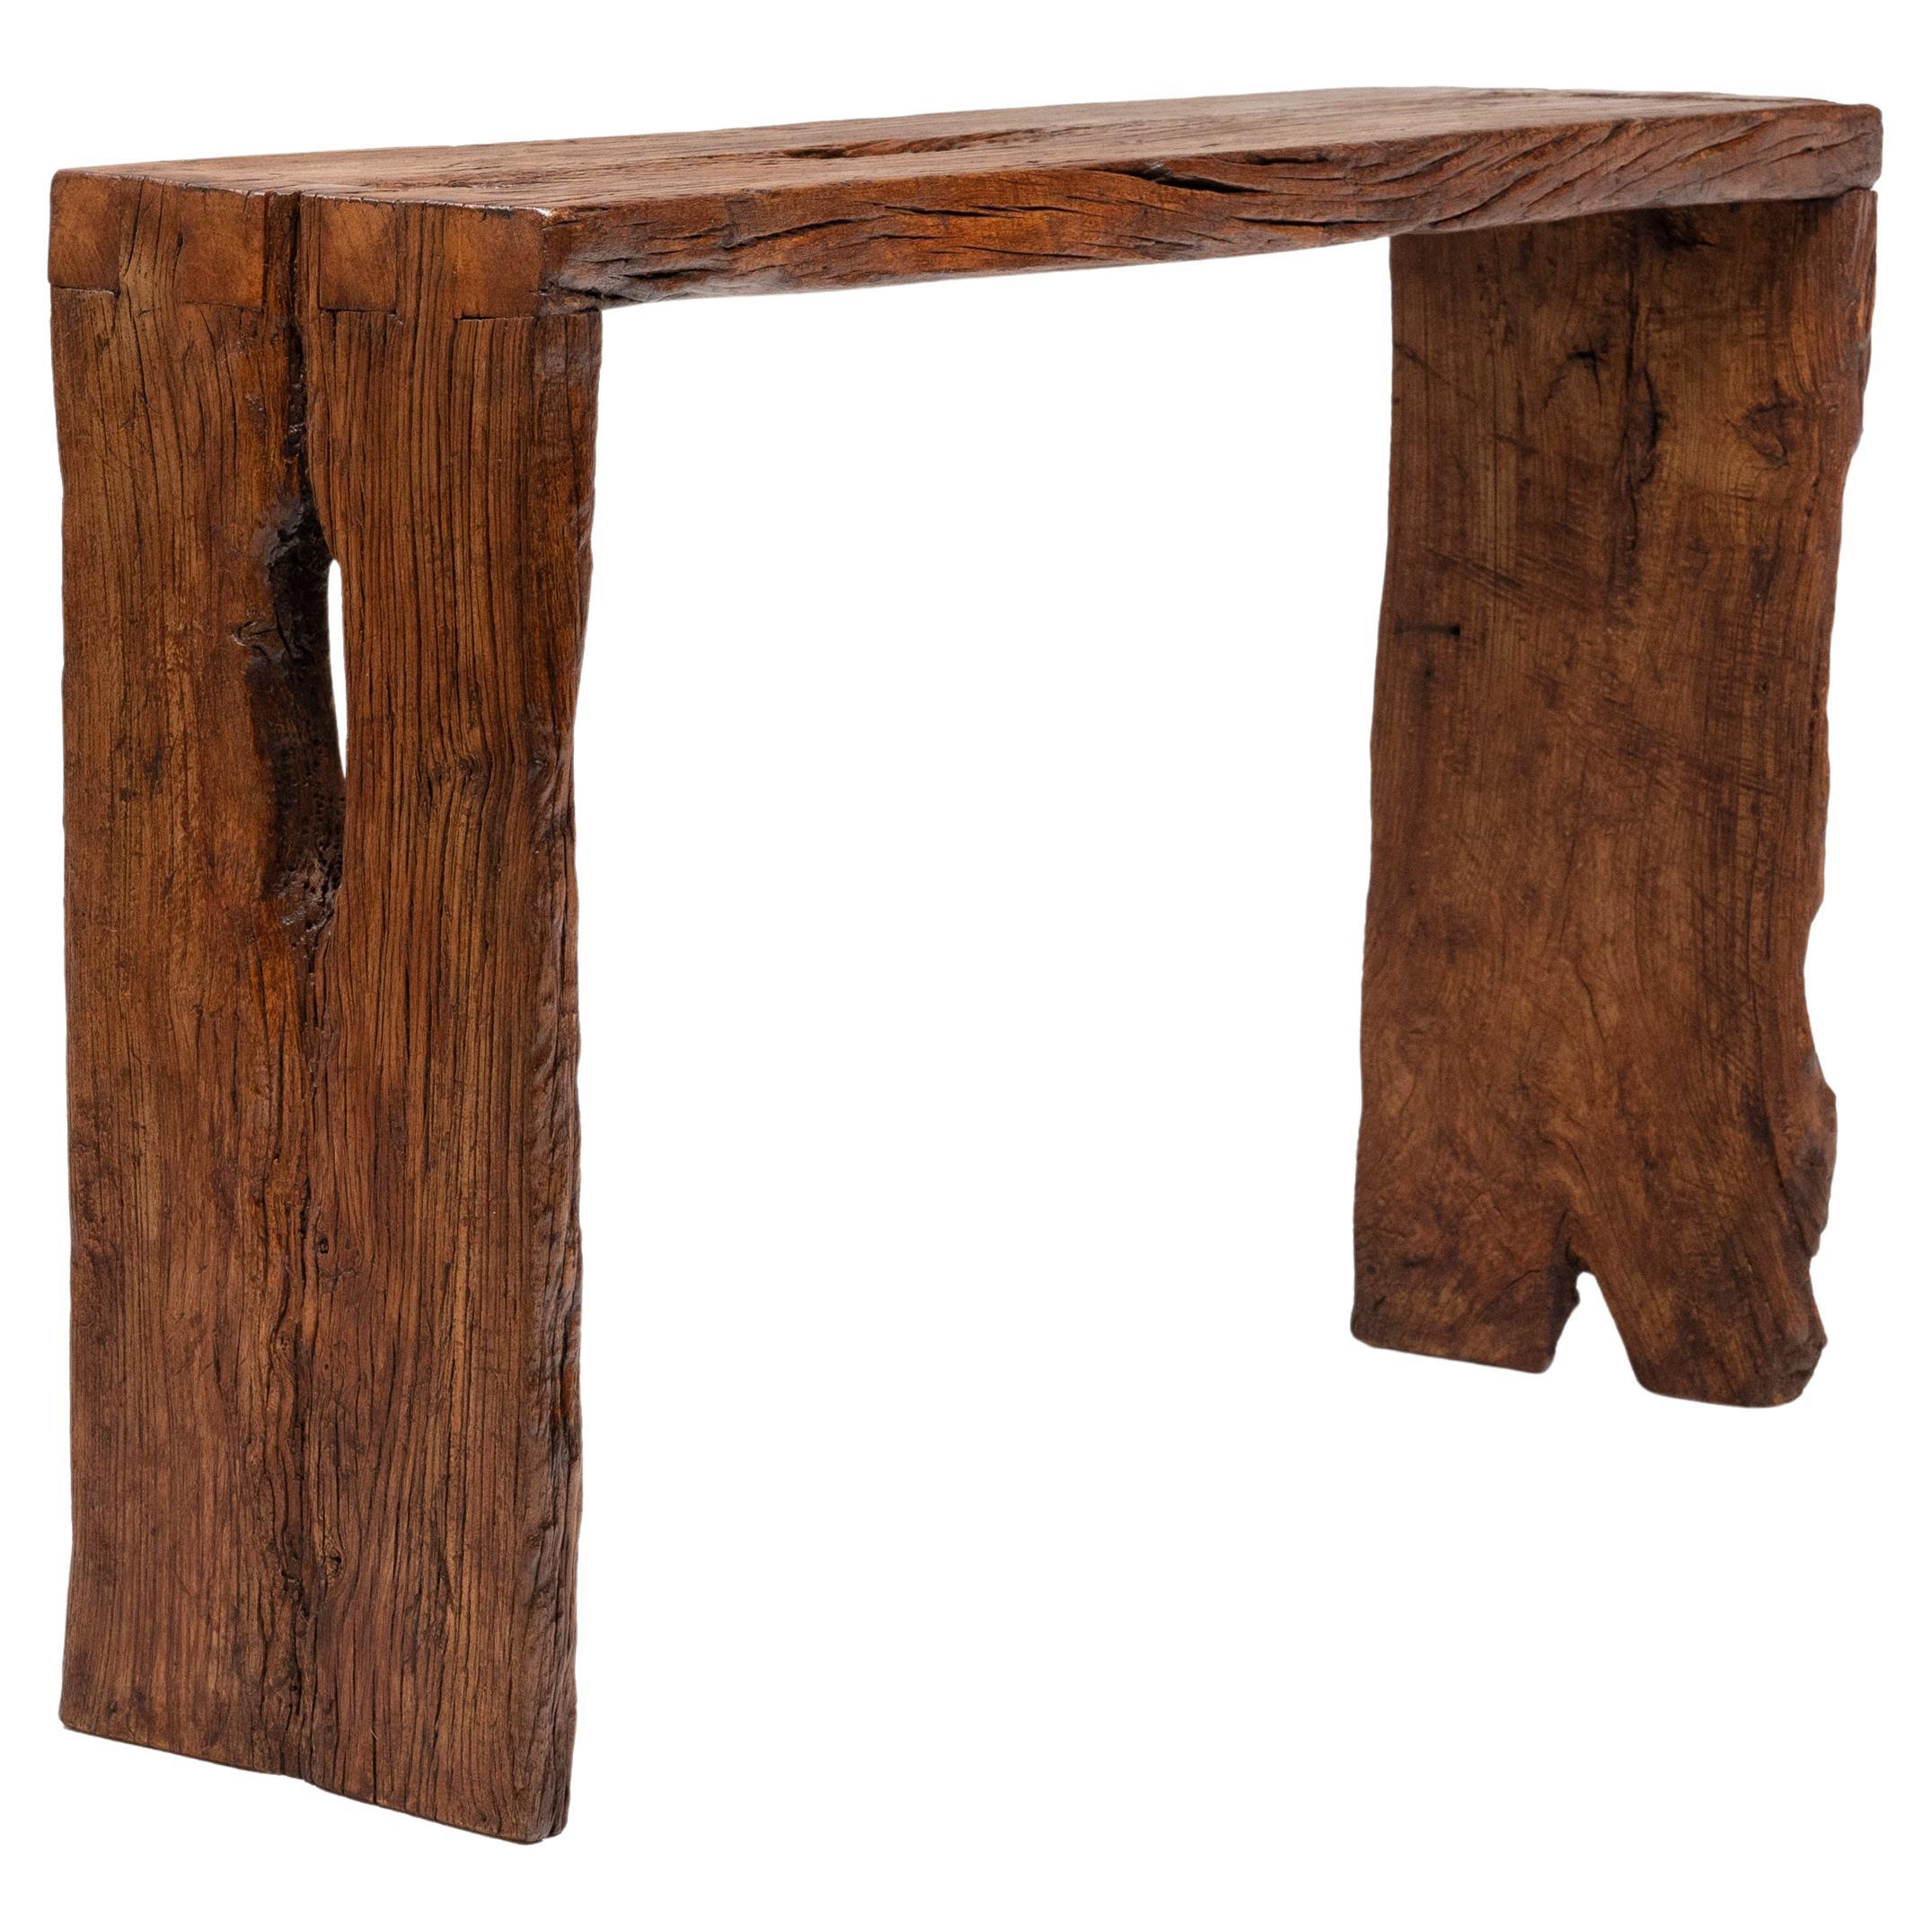 Reclaimed Chinese Elm Waterfall Table For Sale